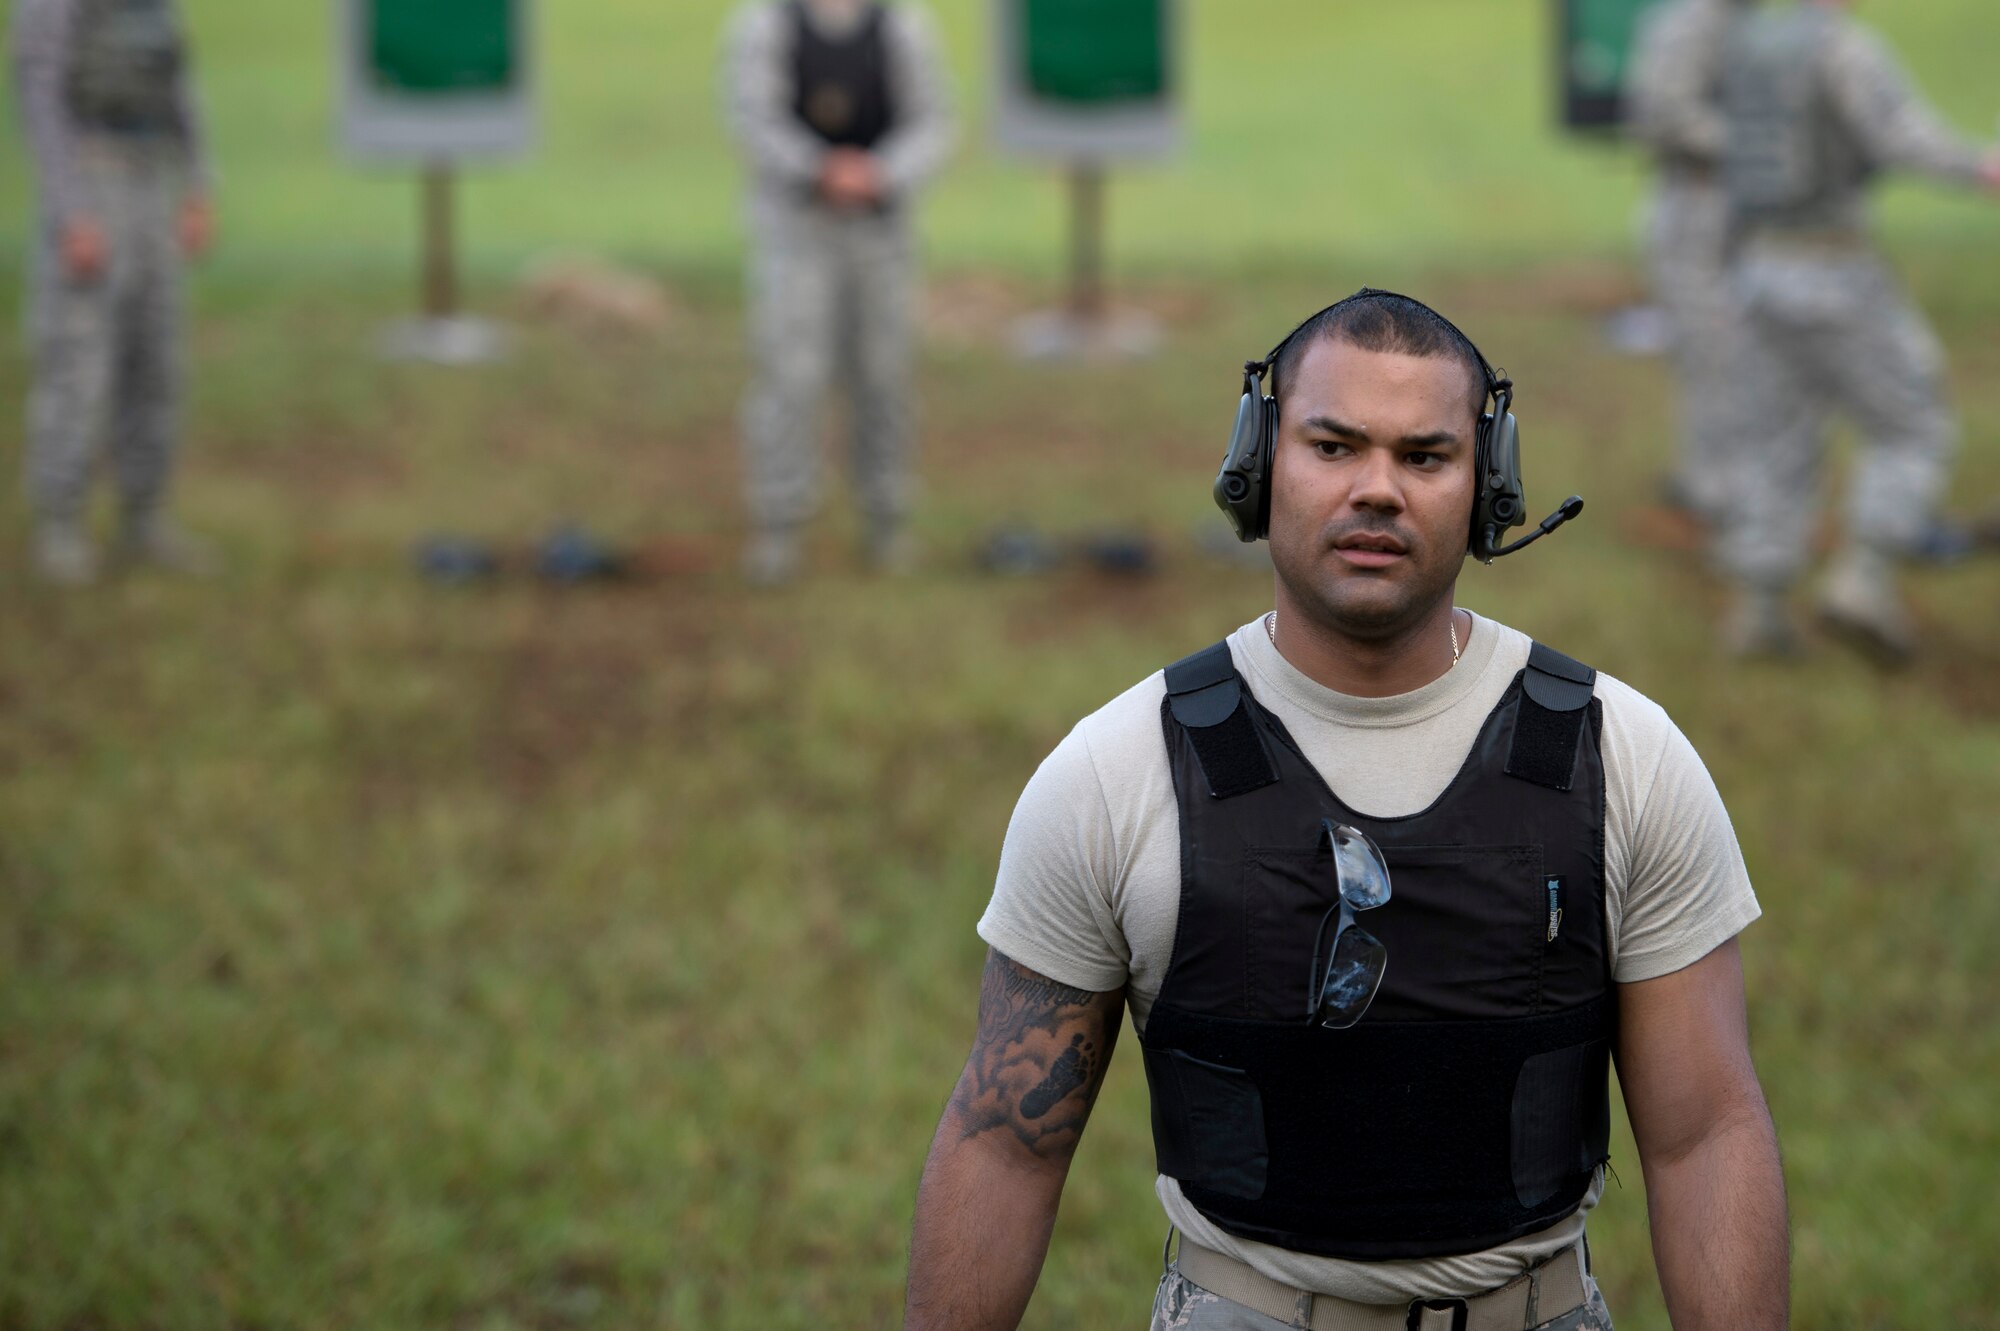 U.S Air Force Staff Sgt. Melvin Santos, a training instructor assigned to the 6th Security Forces Squadron, walks to the original firing line after showing his students how the firing proficiency exercise should be performed, Aug. 16, 2017 at MacDill Air Force Base, Fla.